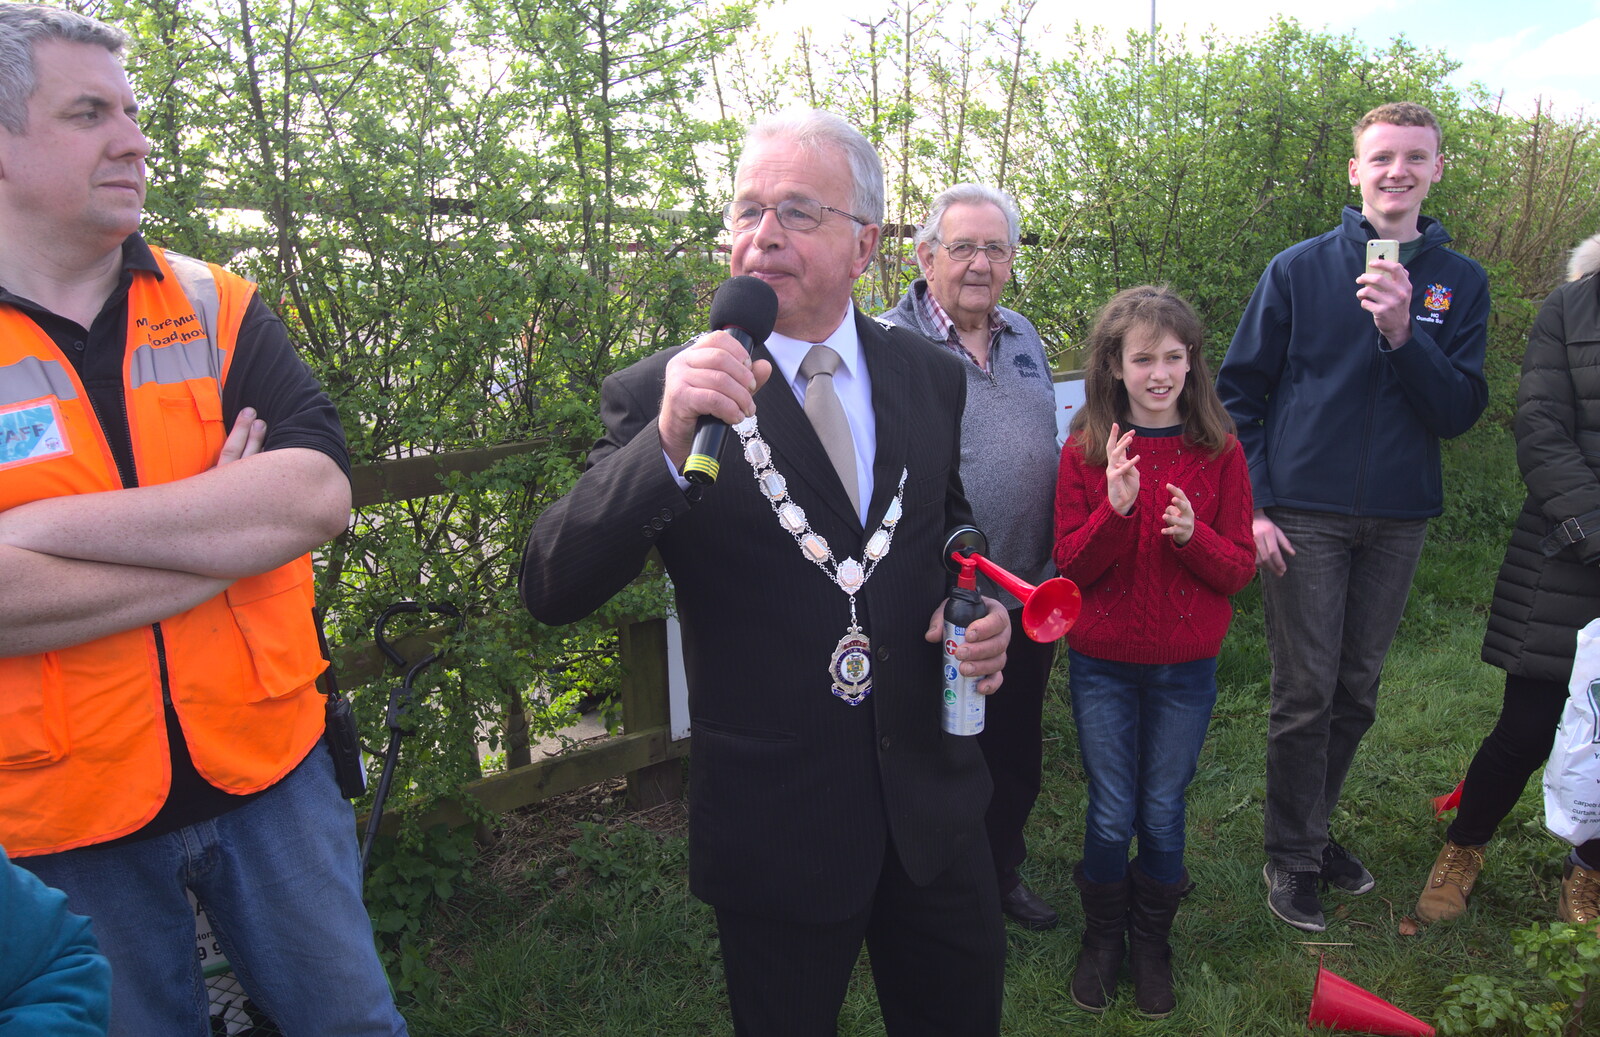 The Mayor of Bungay starts the half marathon from The Black Dog Festival of Running, Bungay, Suffolk - 2nd April 2017